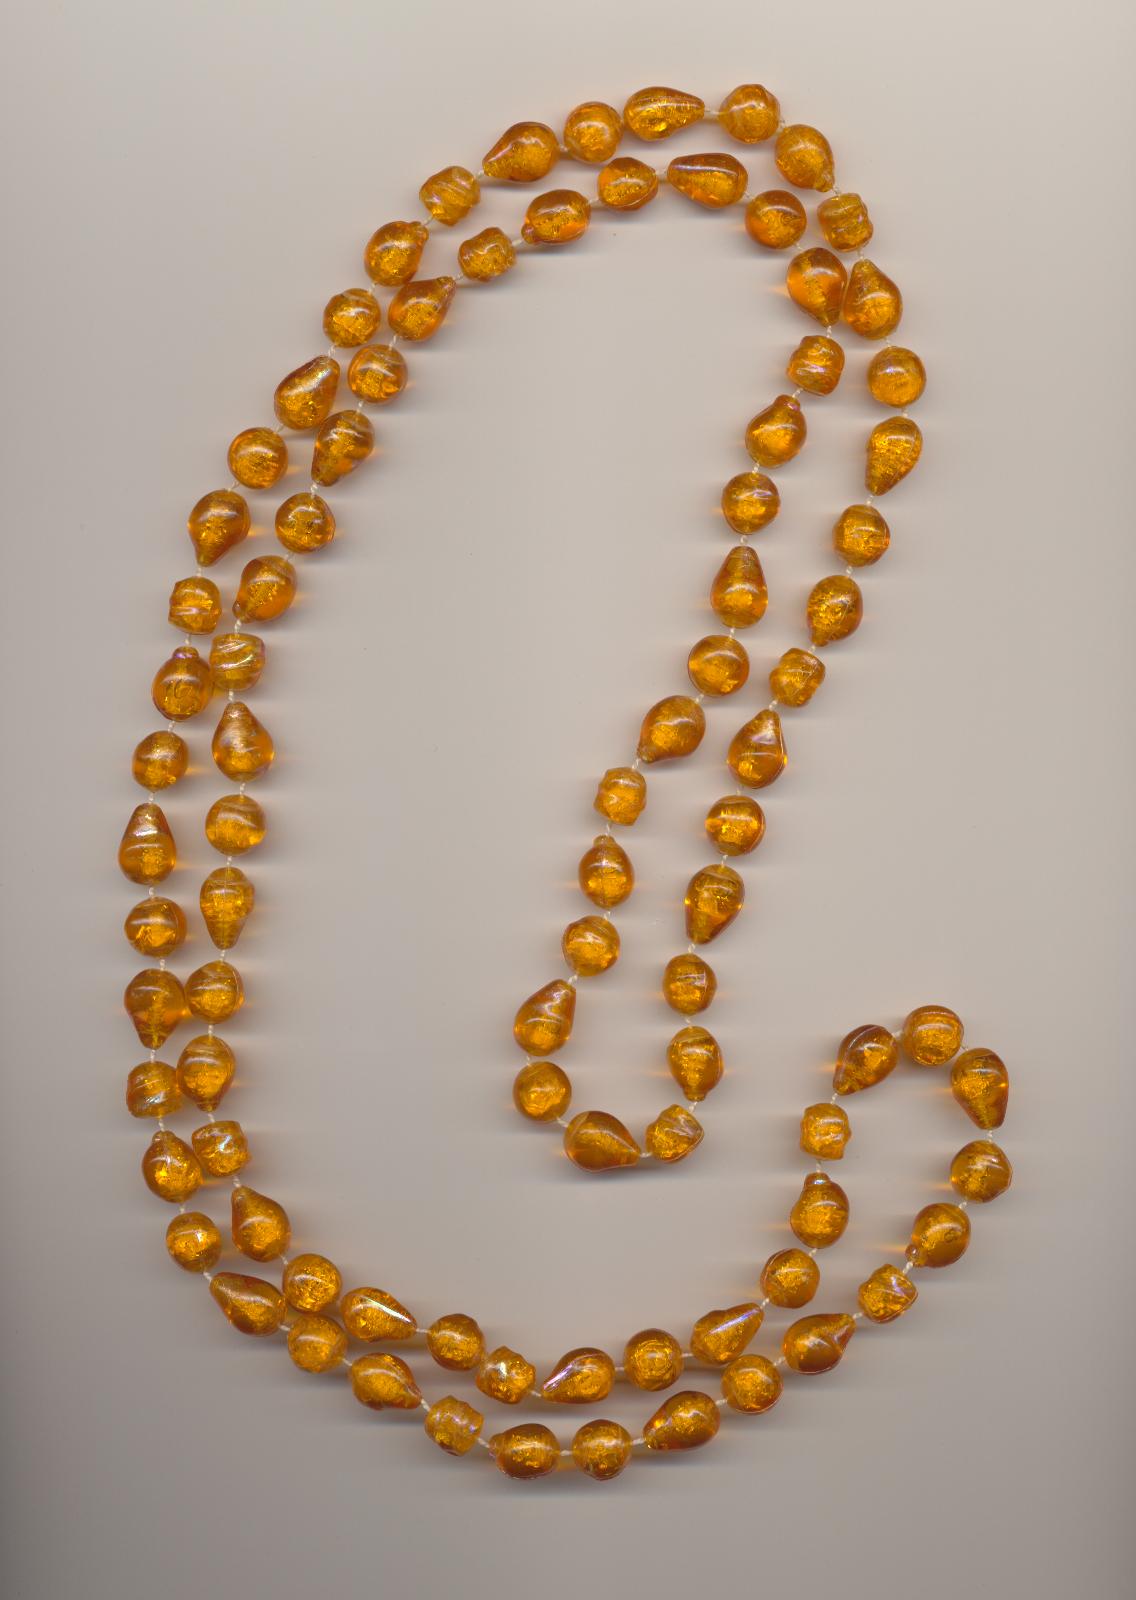 Long yellow amber color plastic imitation bead necklace